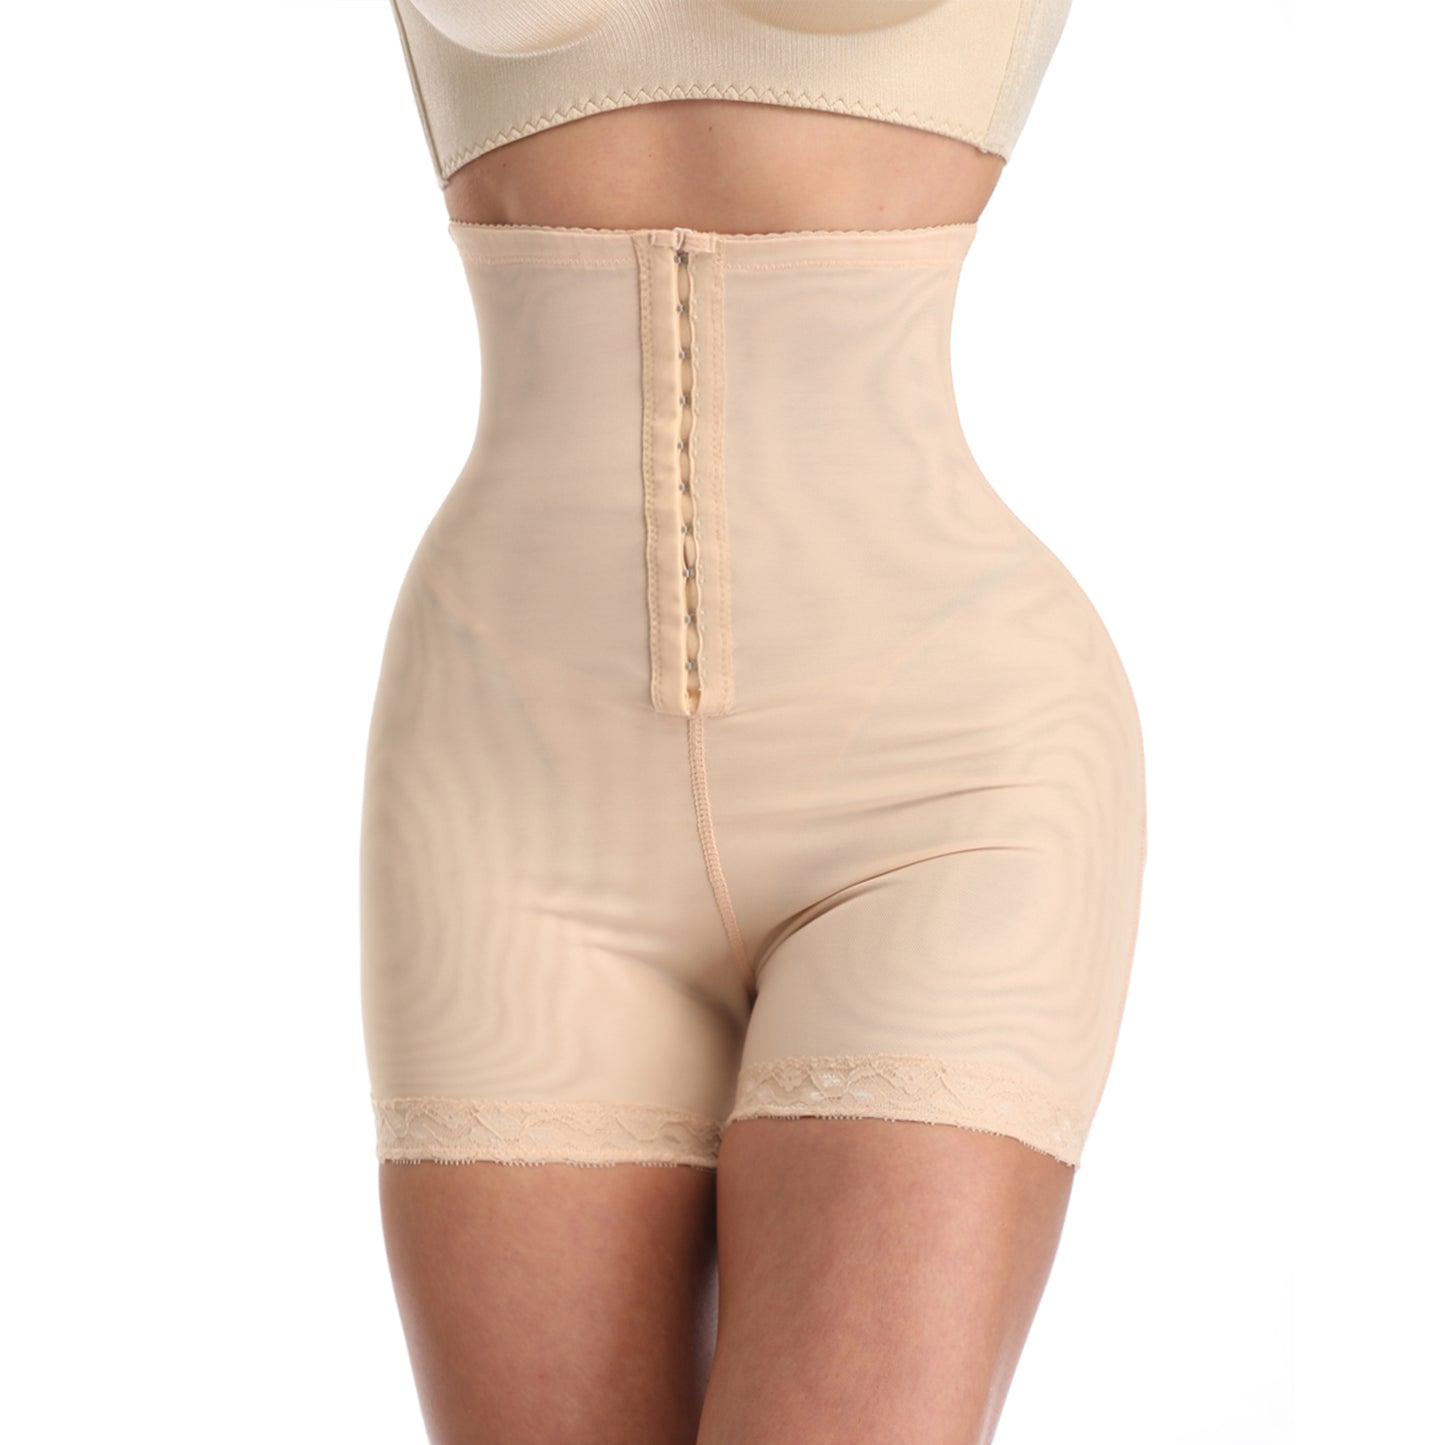 Women’s High Waisted Shaping Gridles